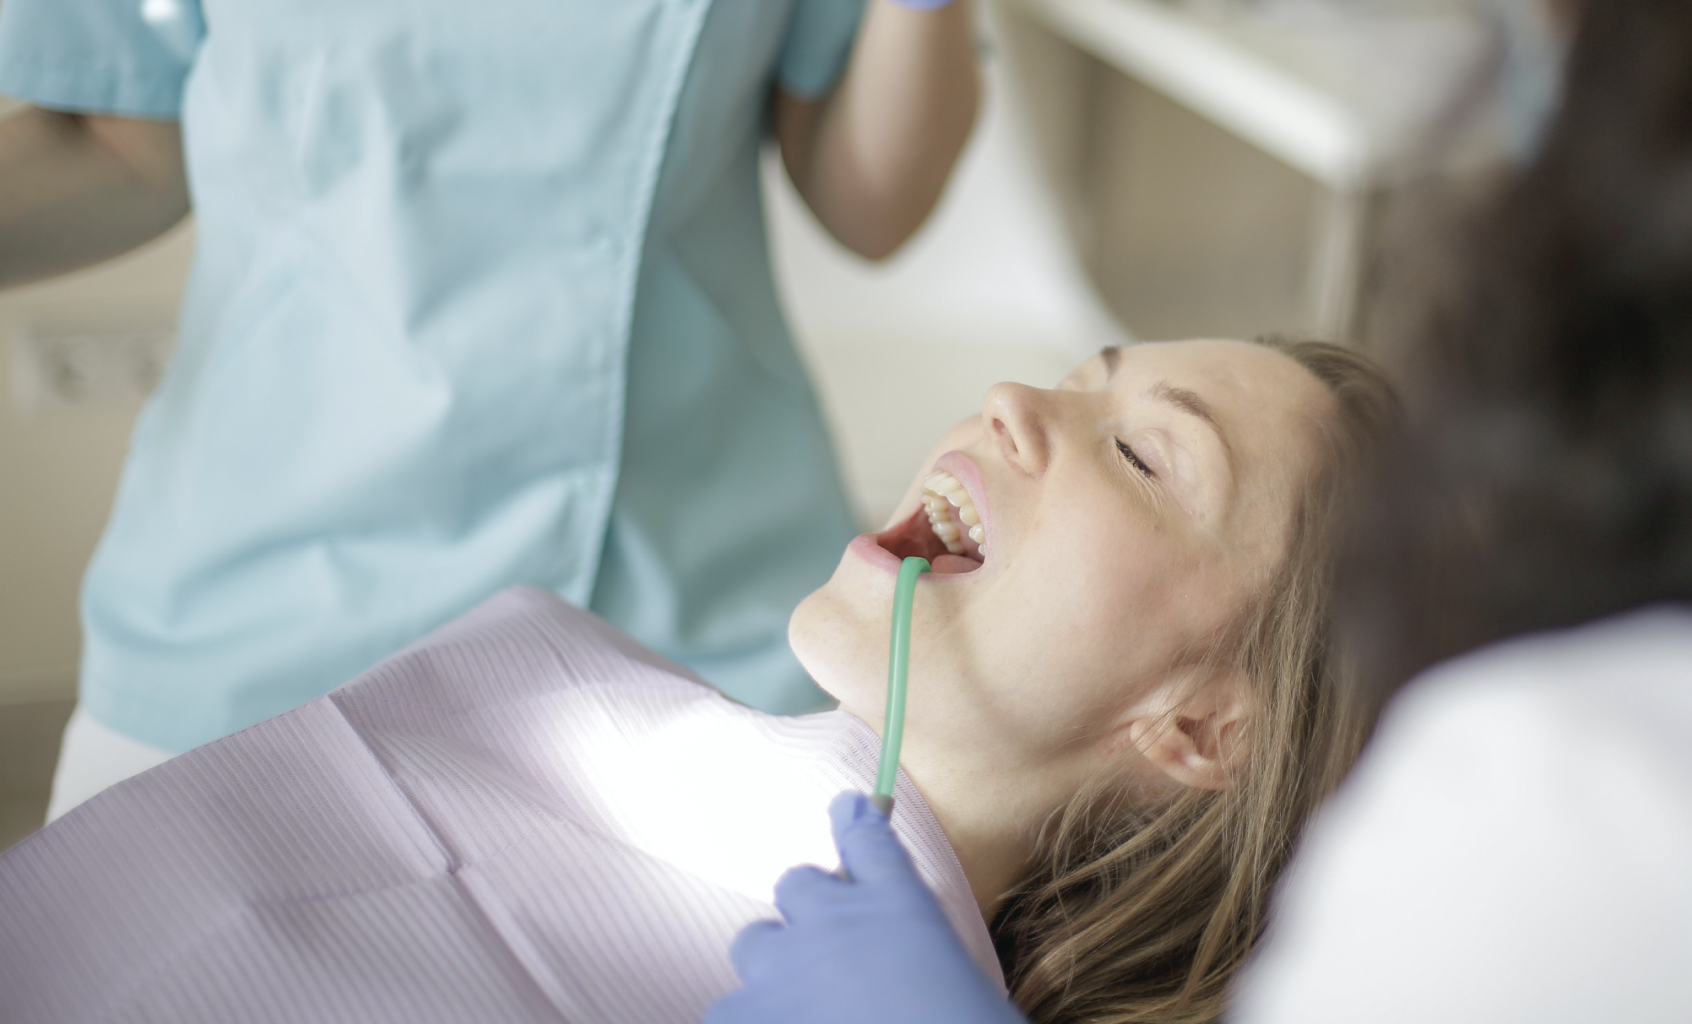 Woman getting a root canal treatment